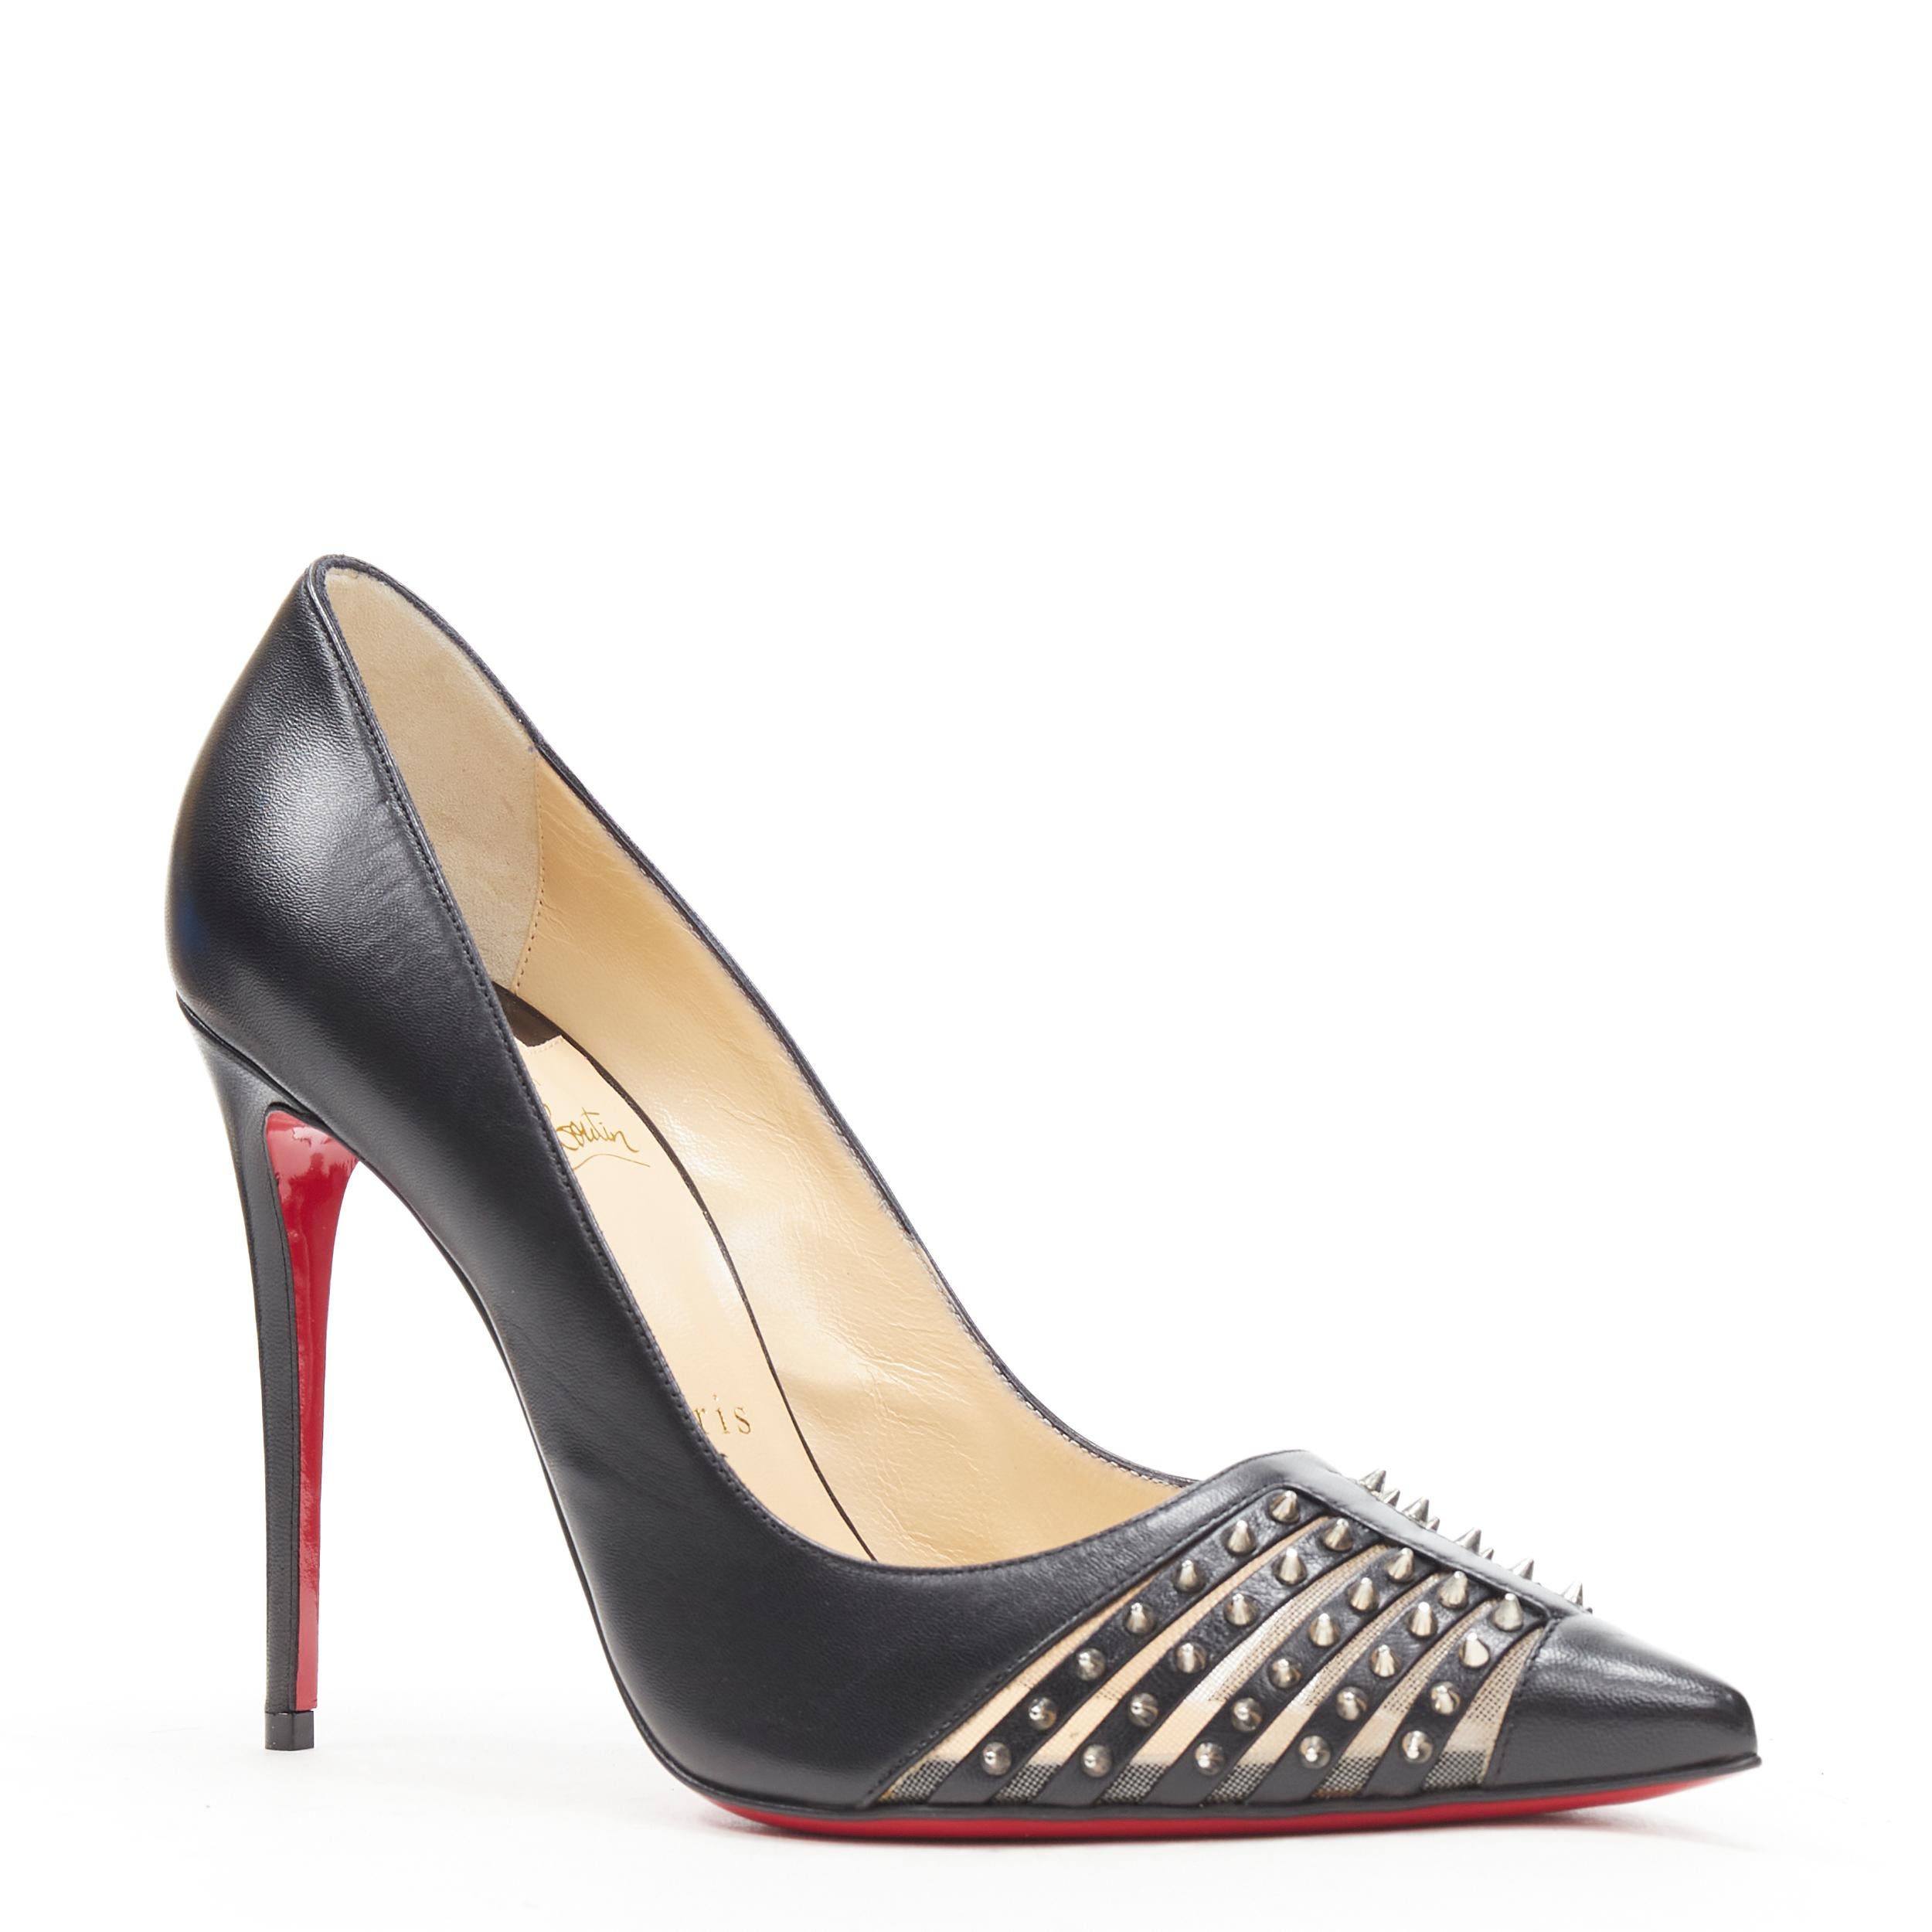 new CHRISTIAN LOUBOUTIN Bereta 100 black spike stud mesh pointy pigalle EU38.5 
Reference: TGAS/B01253 
Brand: Christian Louboutin 
Model: Bereta 100 
Material: Leather 
Color: Black 
Pattern: Solid 
Extra Detail: Berata 100. Black leather.